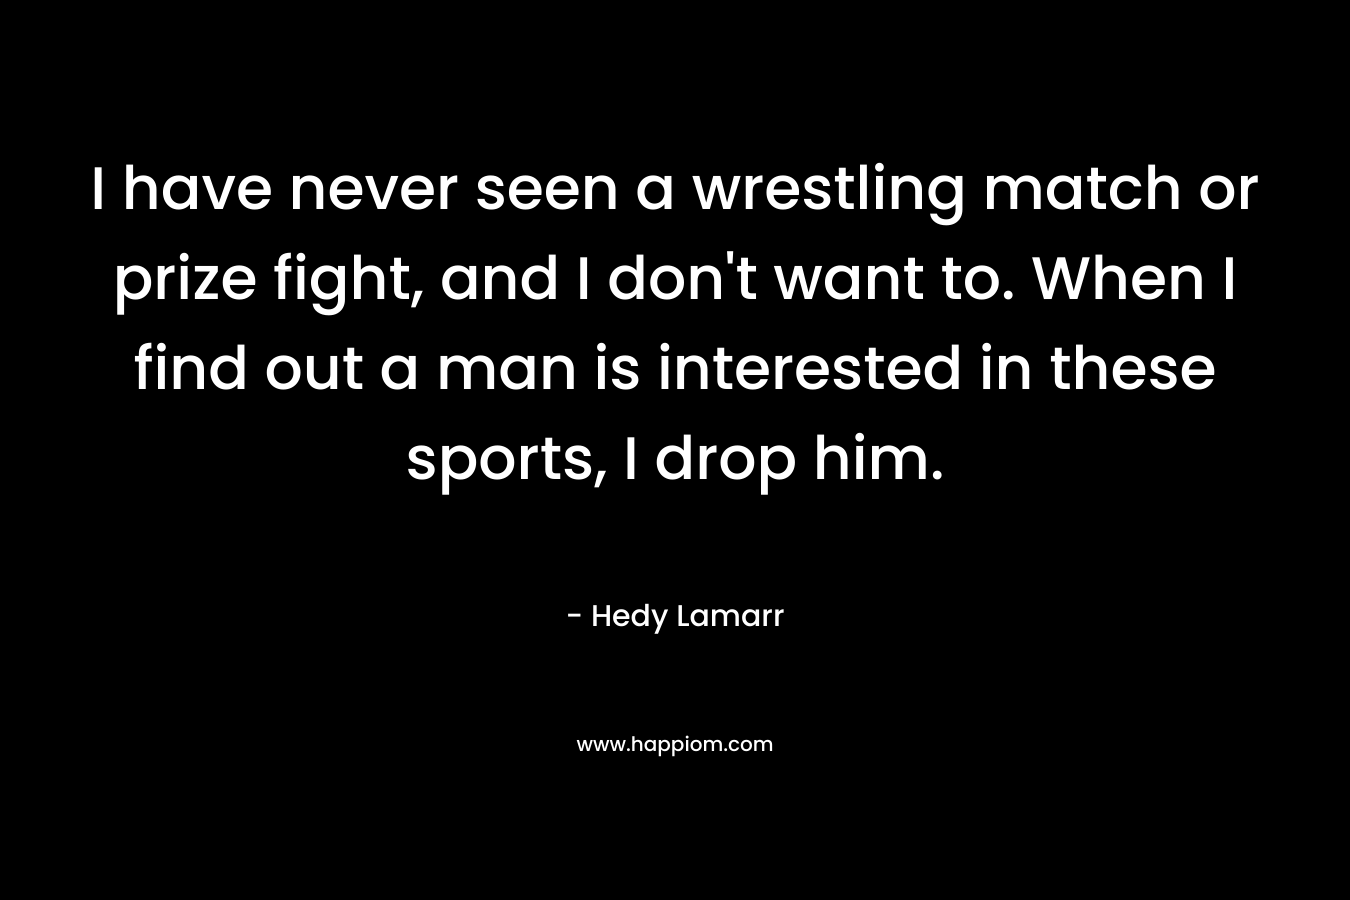 I have never seen a wrestling match or prize fight, and I don’t want to. When I find out a man is interested in these sports, I drop him. – Hedy Lamarr